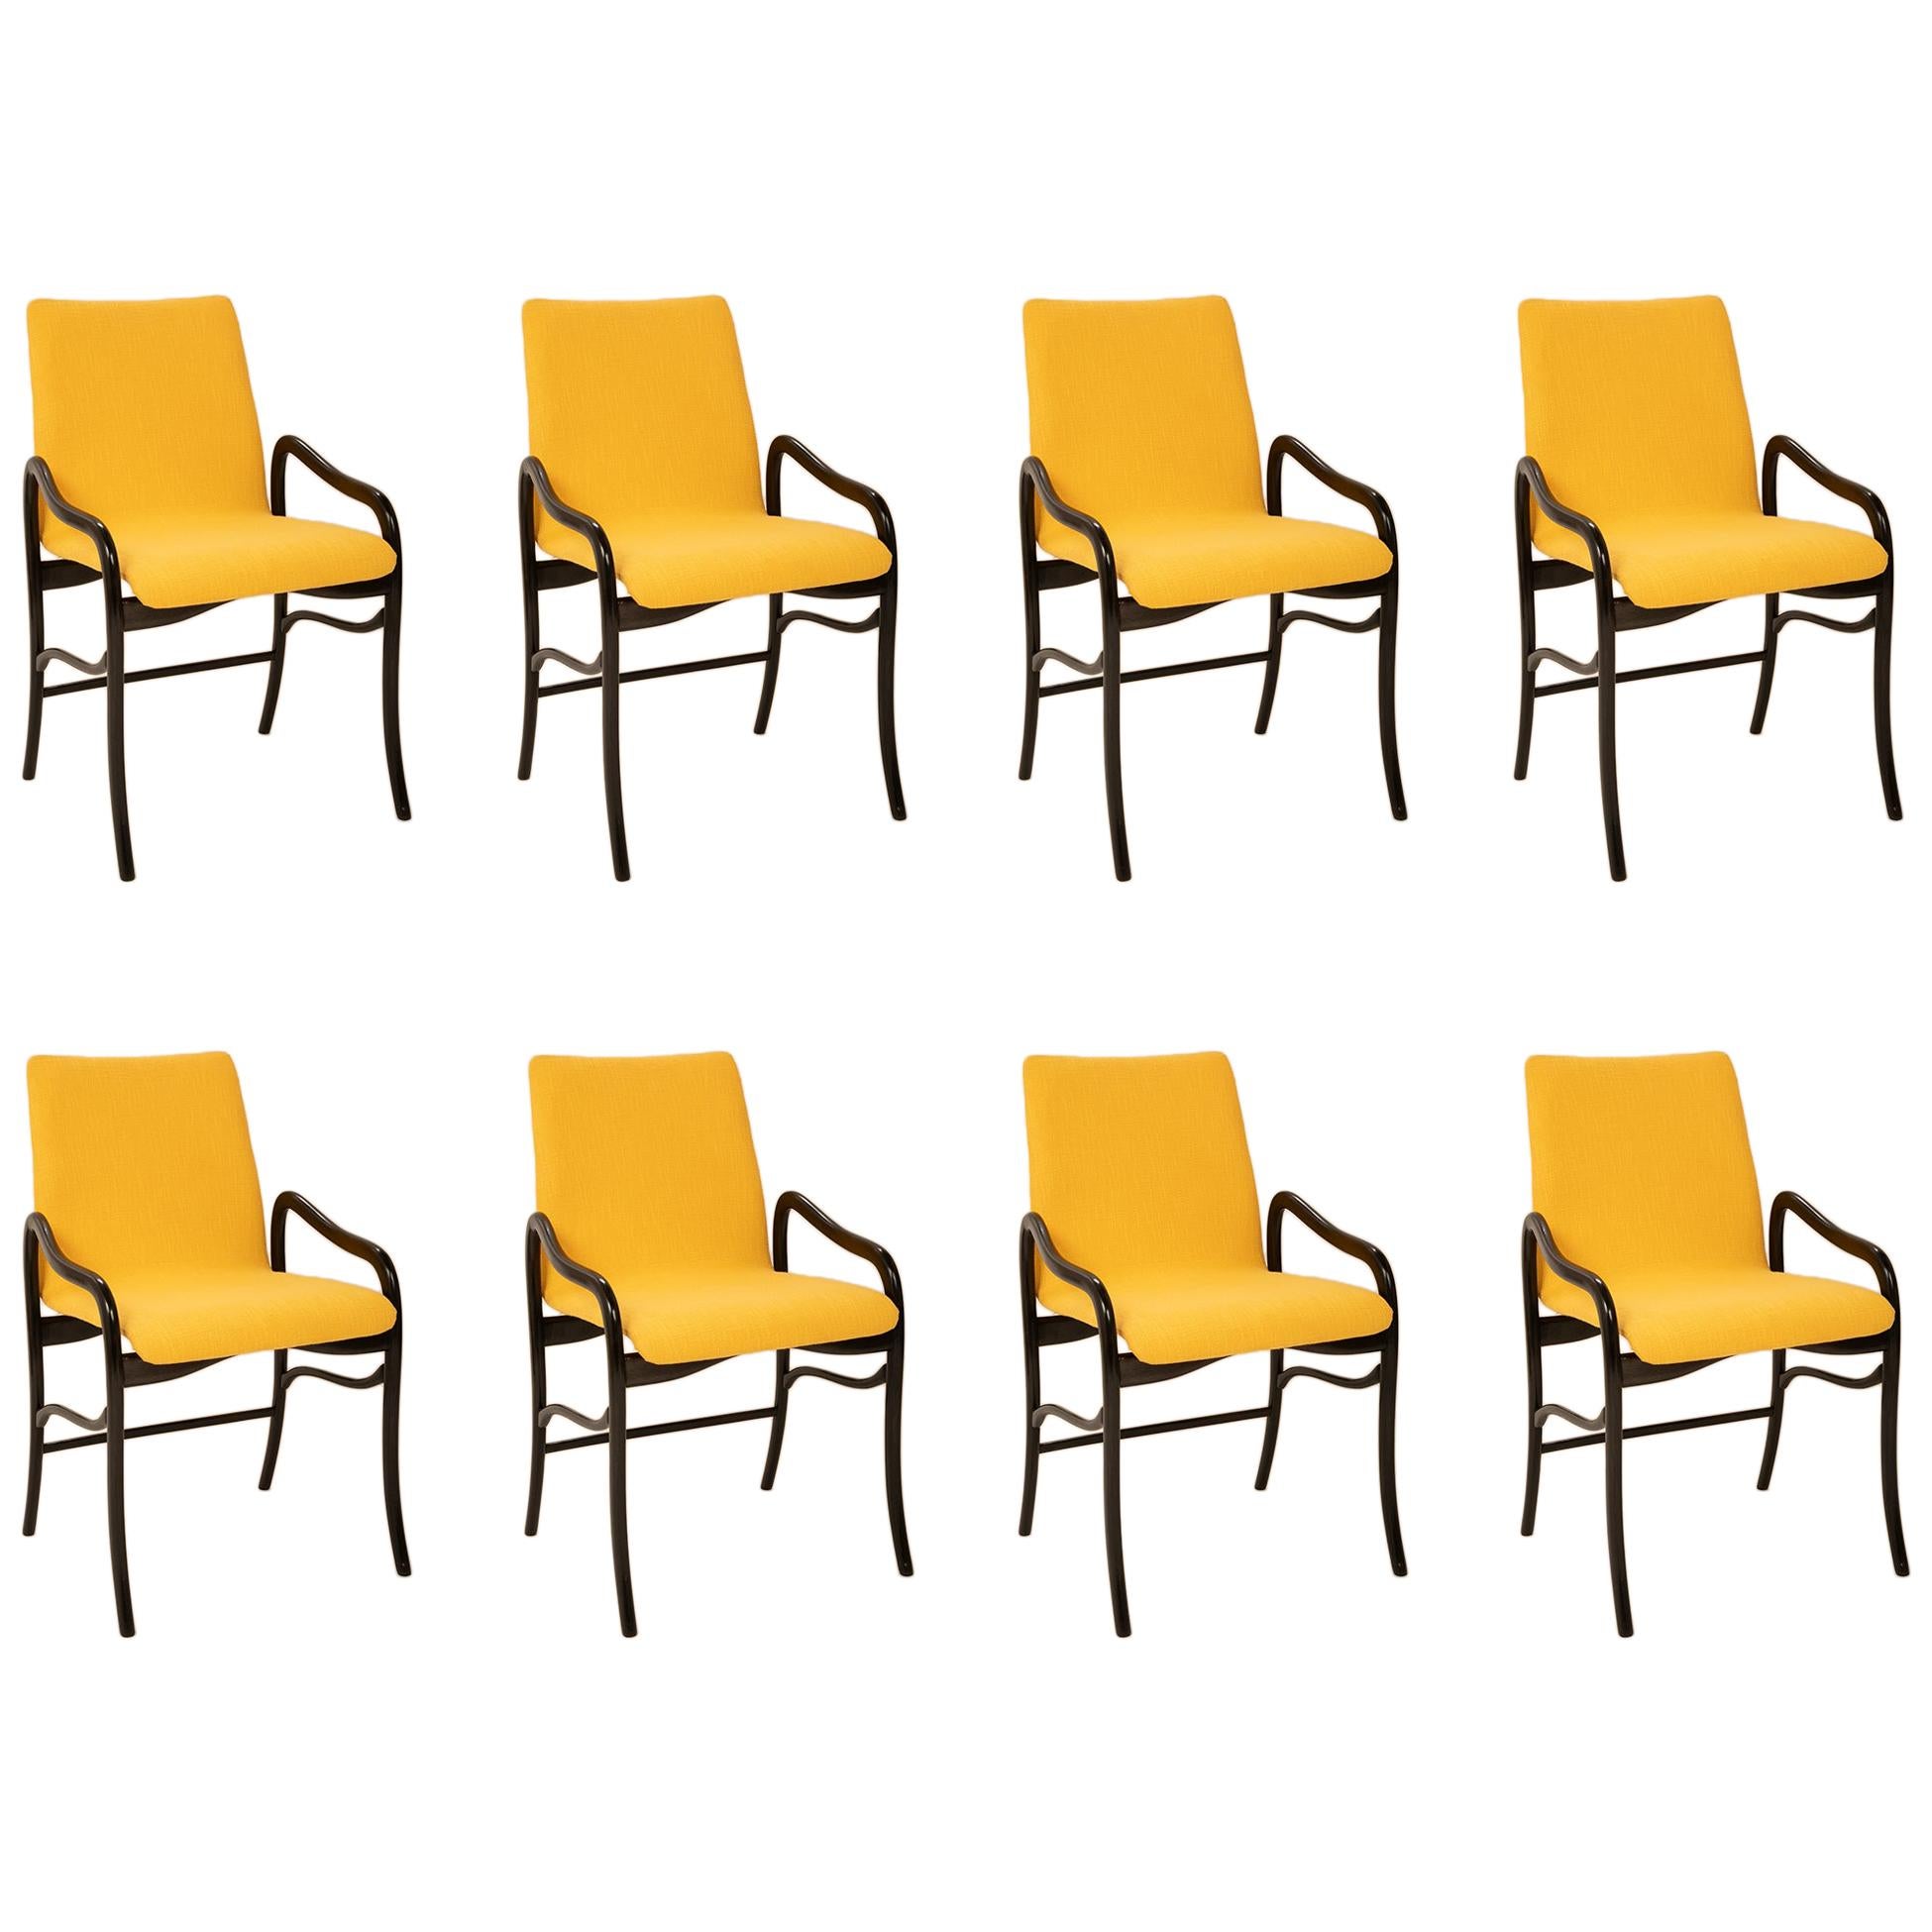 Set of 8 Sculptural Italian Dining Chairs Attributed to Malatesta & Mason